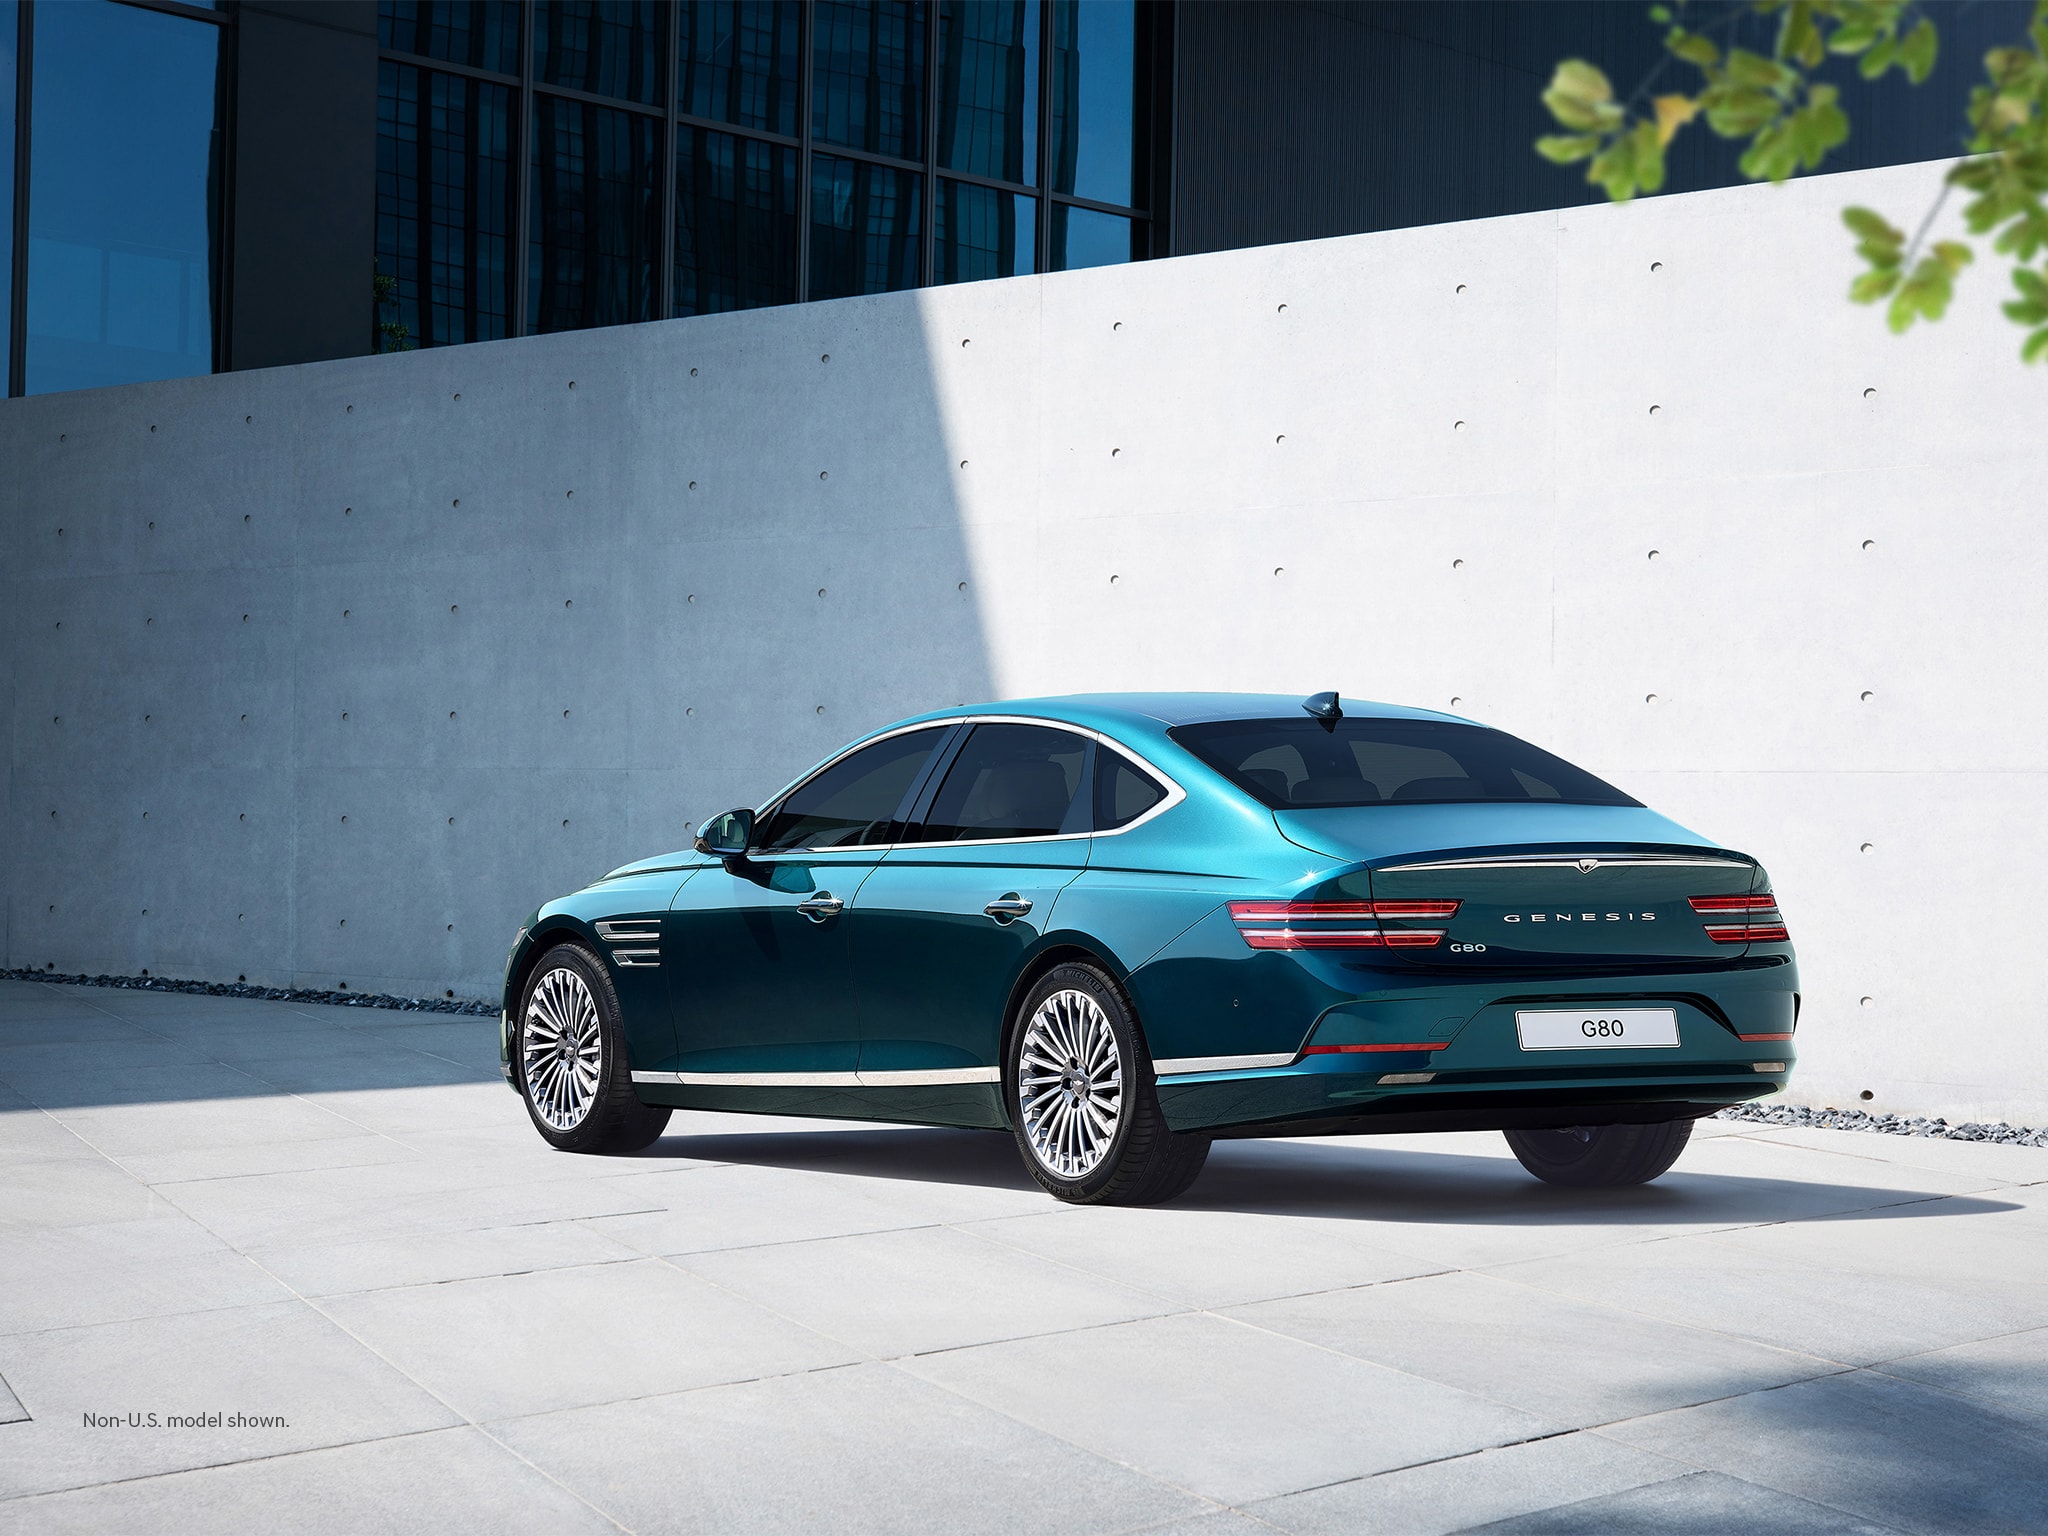 2023 Electrified G80 exterior shown in Matira Blue